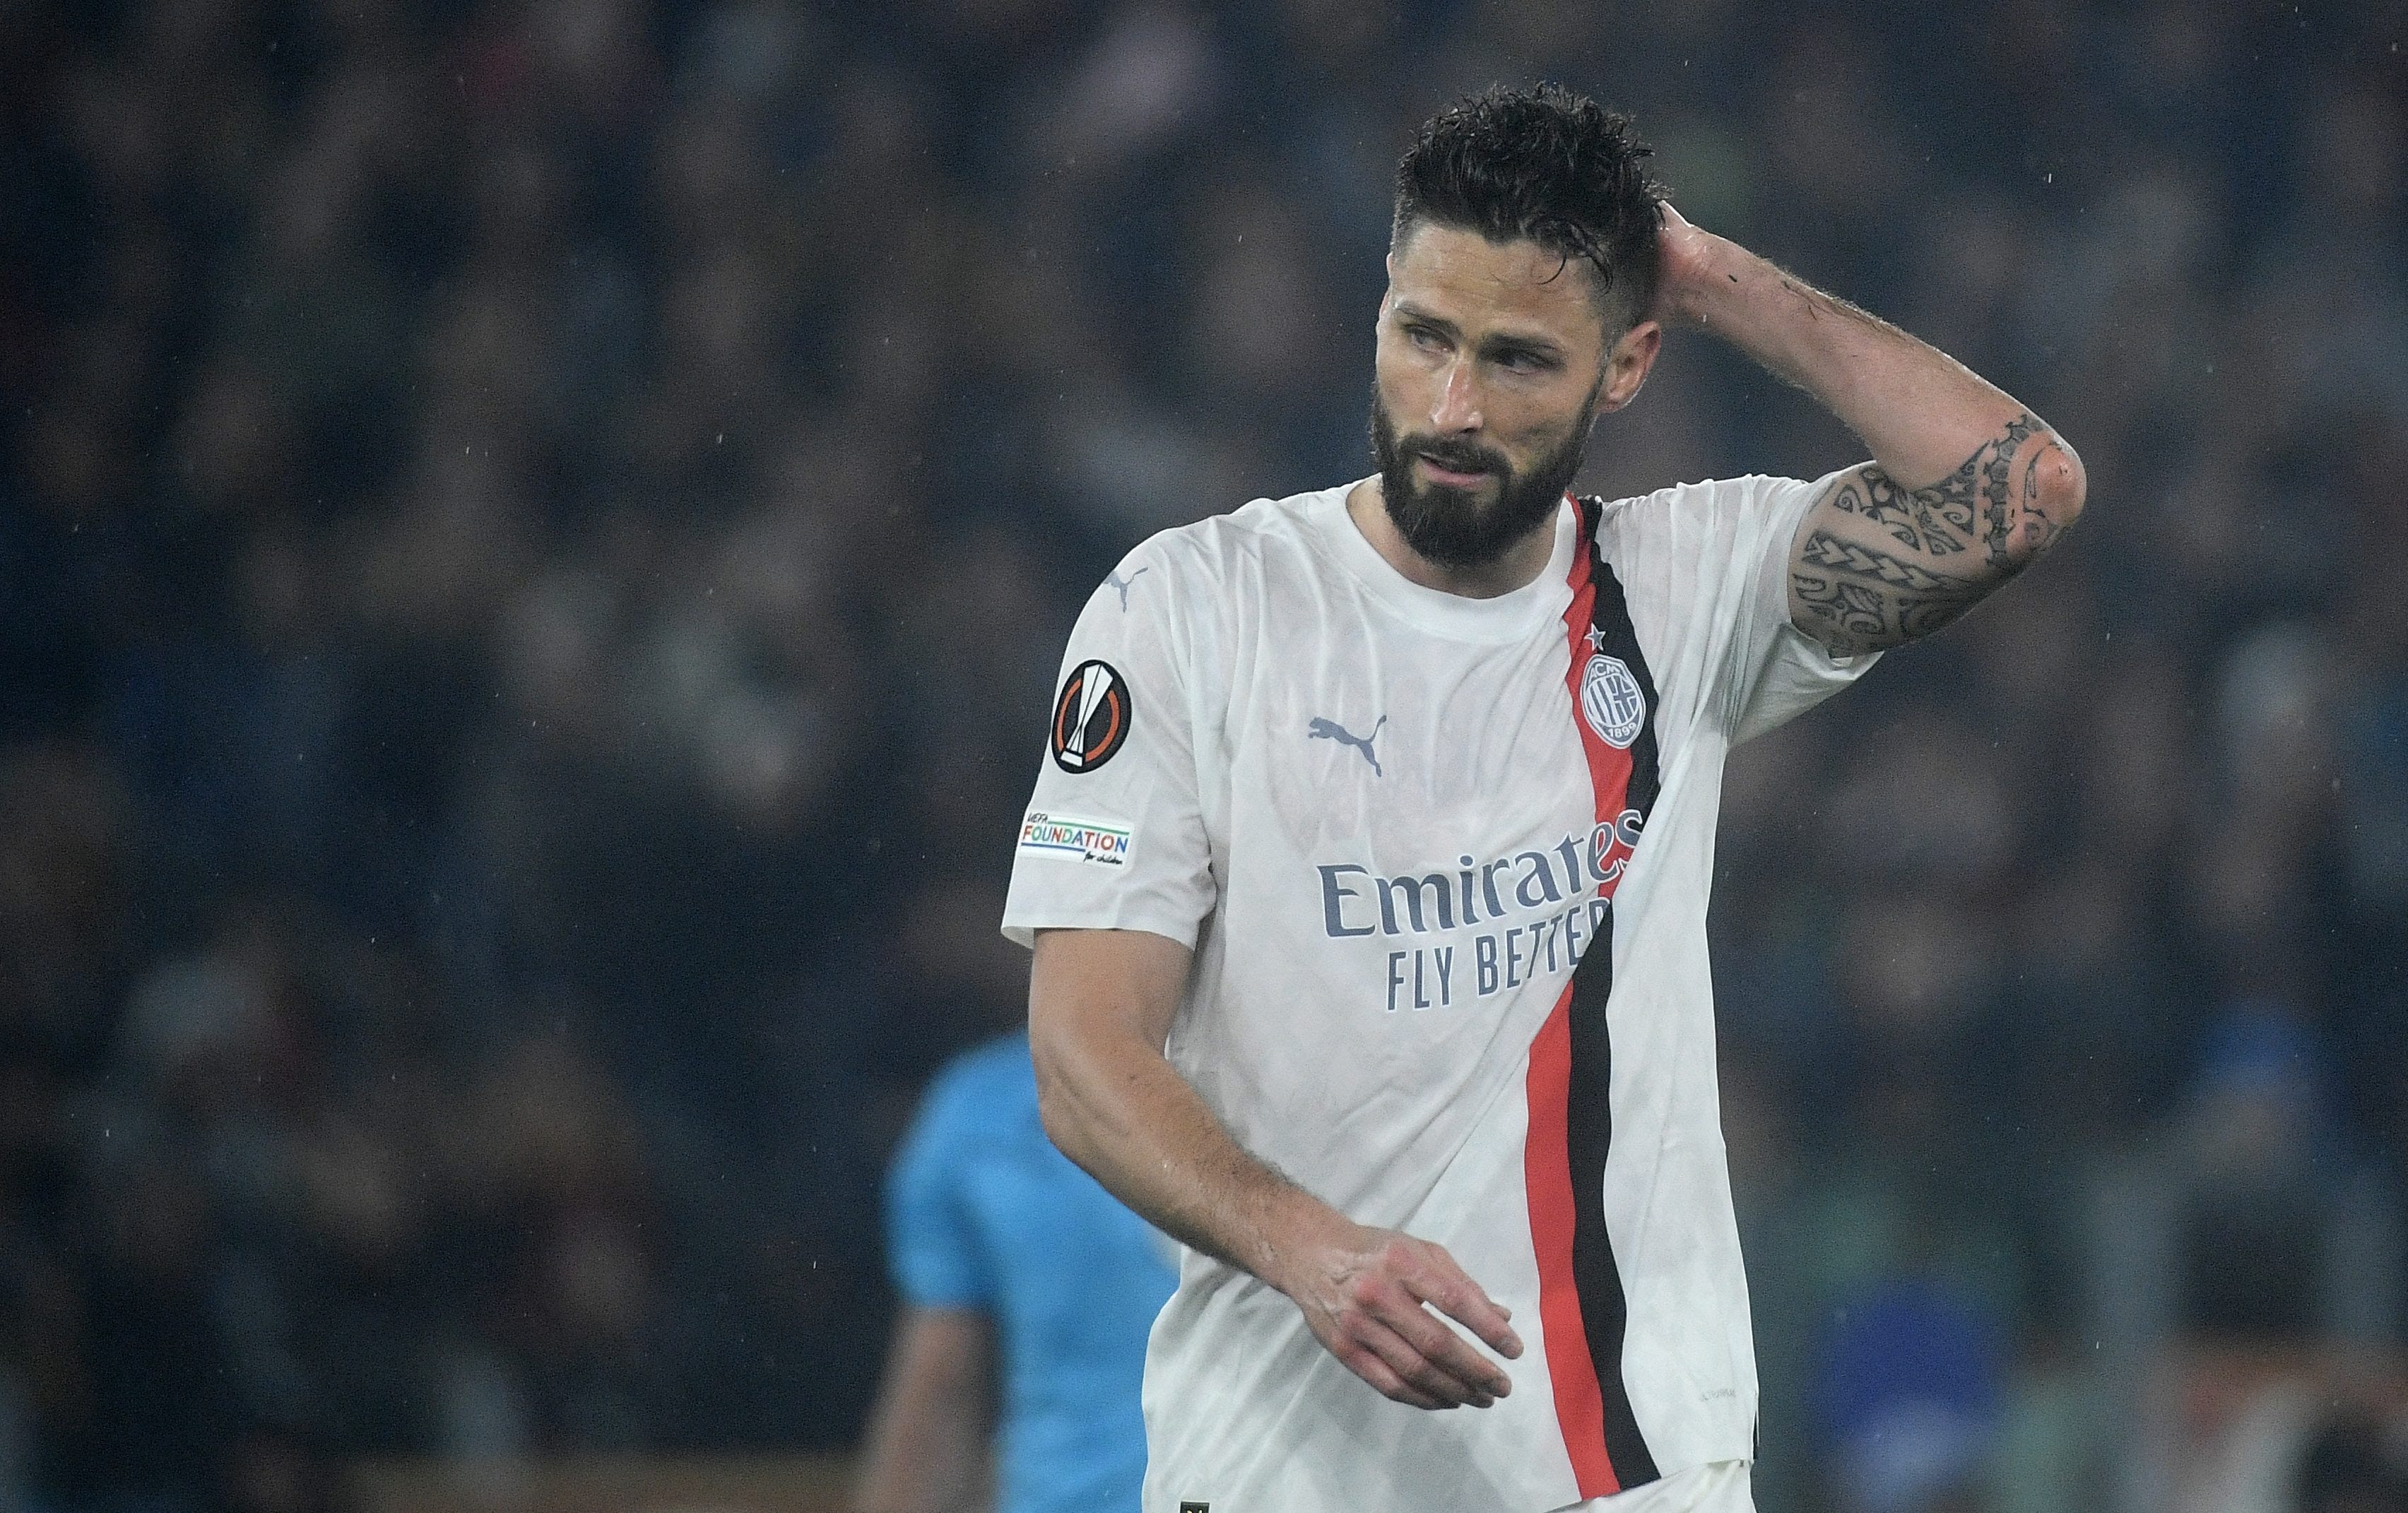 ac milan's trophy hopes dashed as roma claims europa league semifinal place